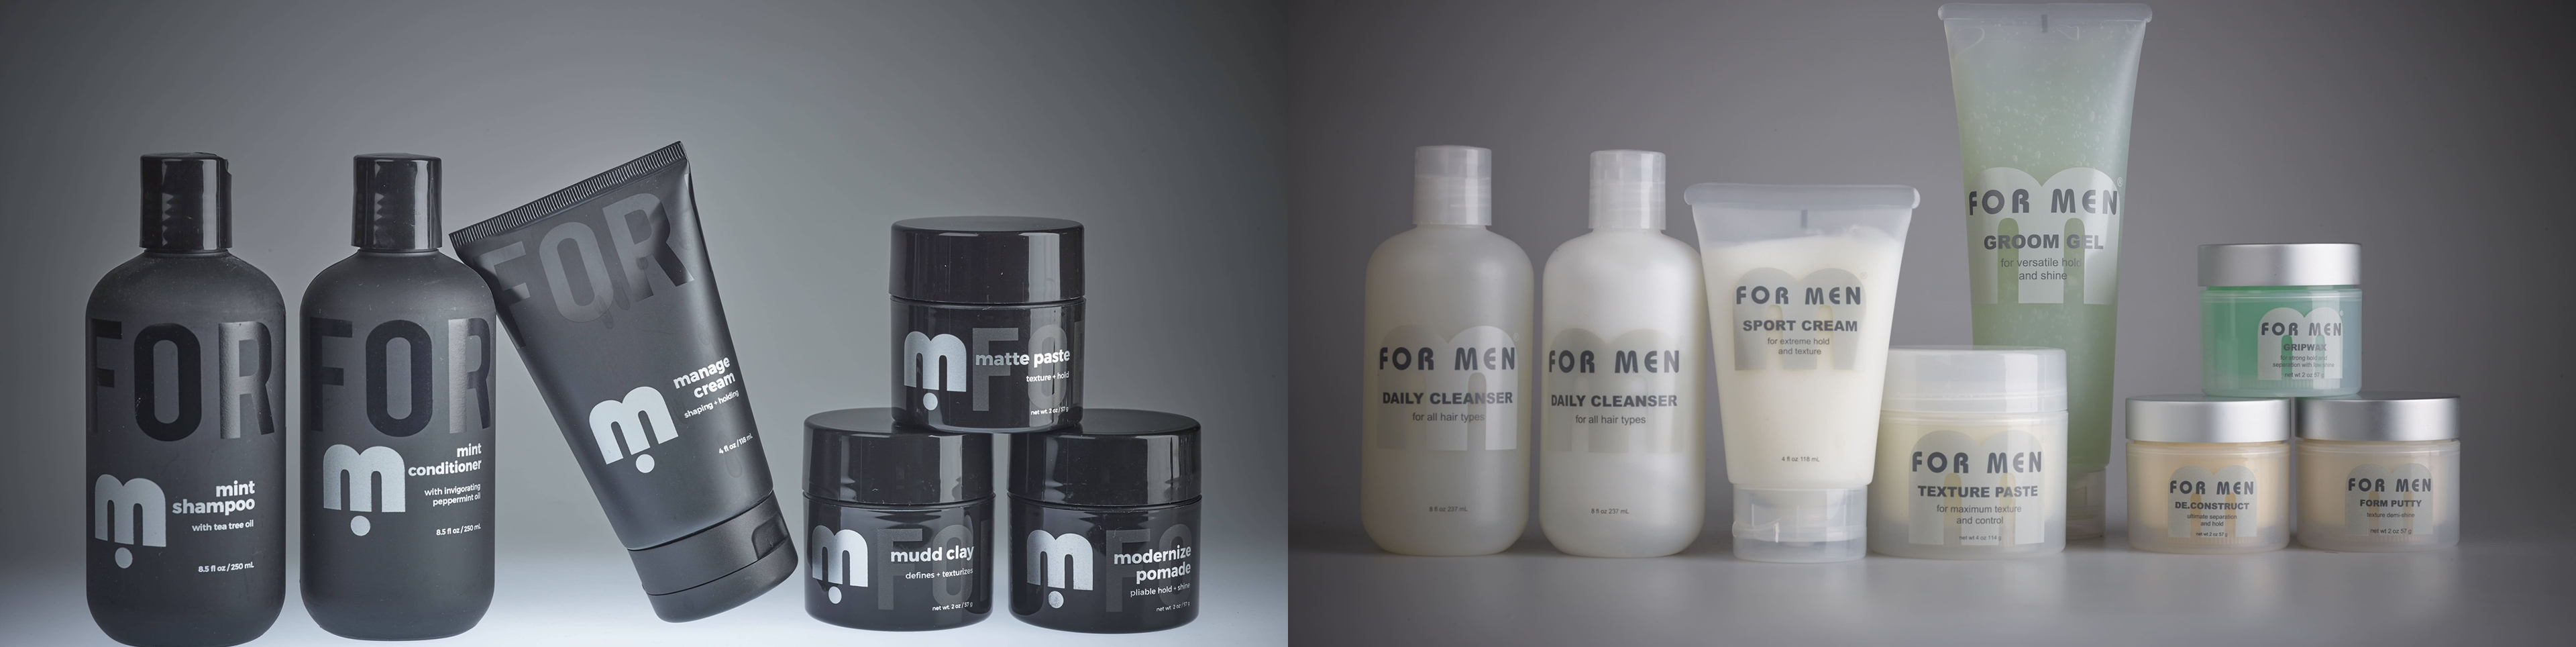 Best hair products for men at FOR MEN Salon and Spa in Lake Forest, California